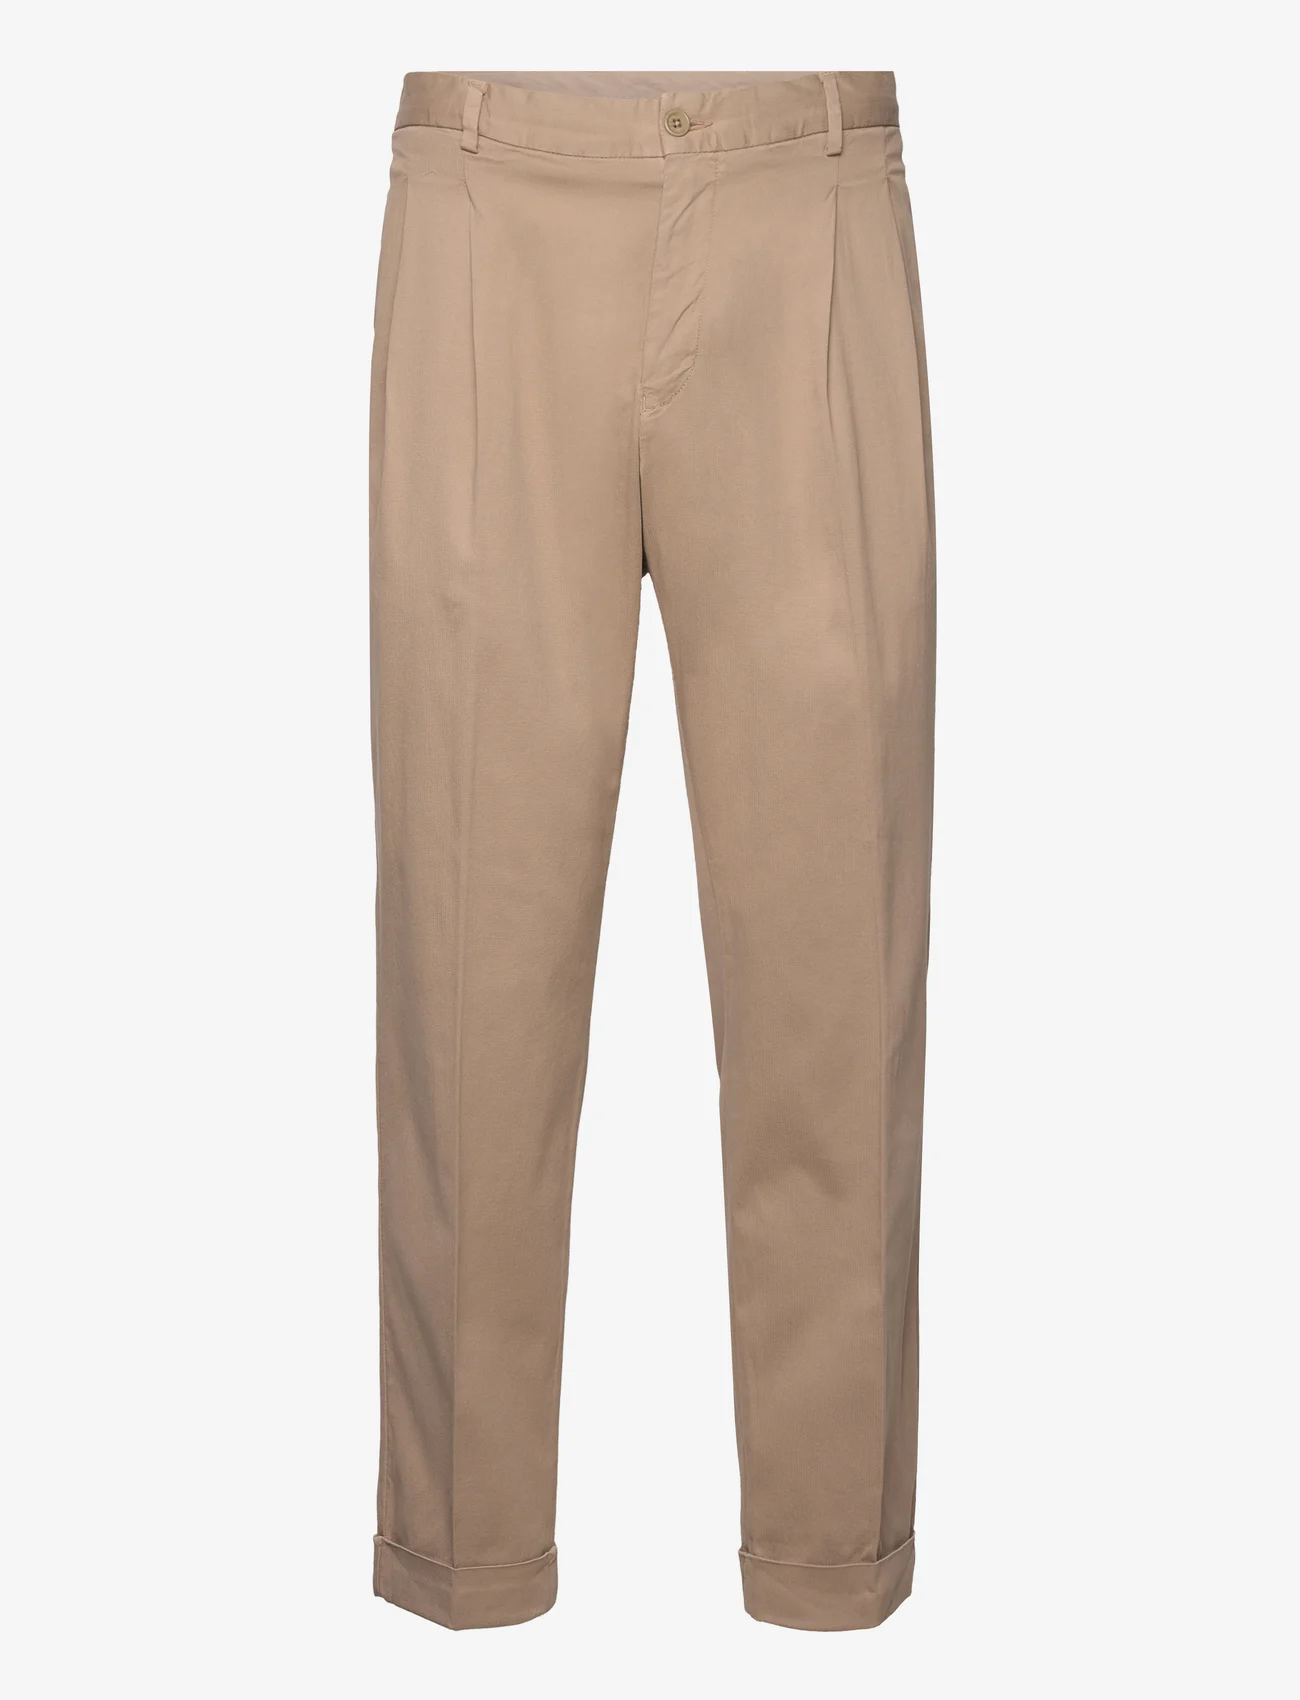 GANT - RELAXED TAPERED COTTON SUIT PANTS - chino's - taupe beige - 0